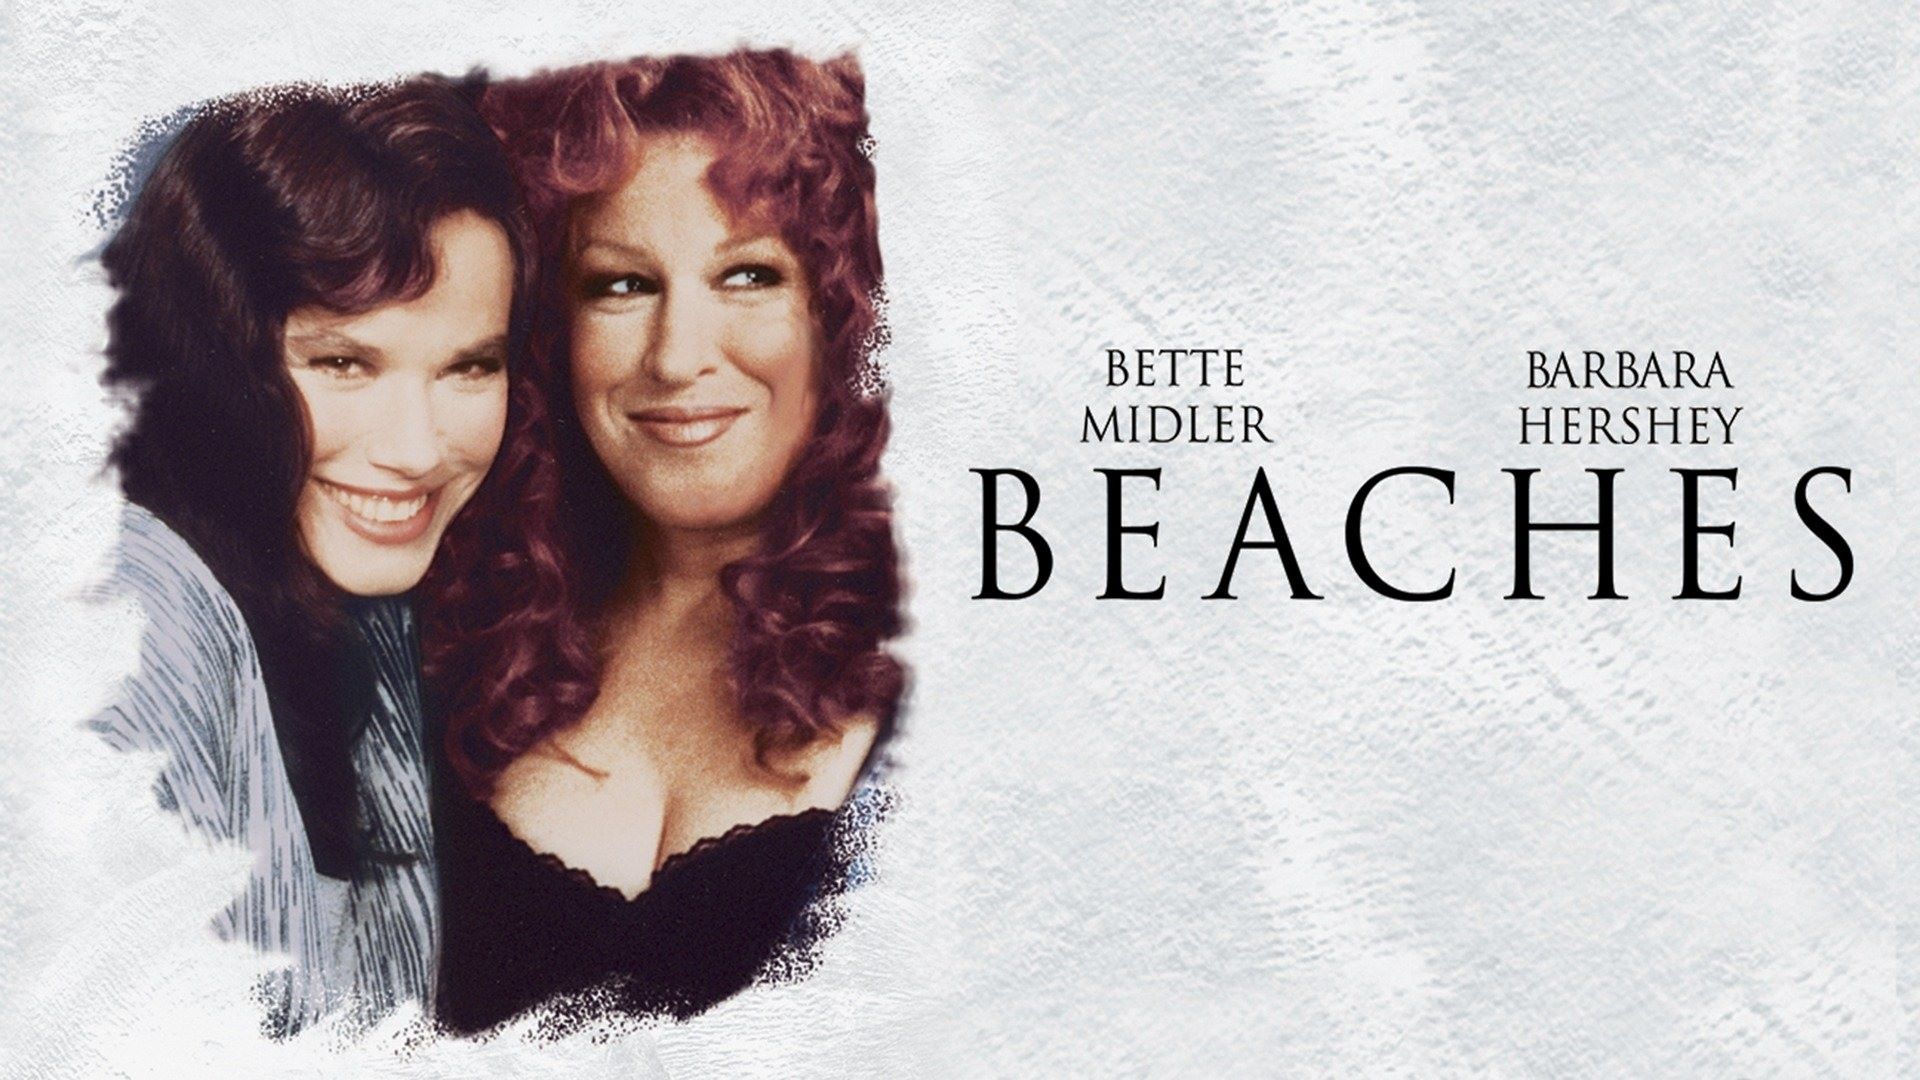 38-facts-about-the-movie-beaches